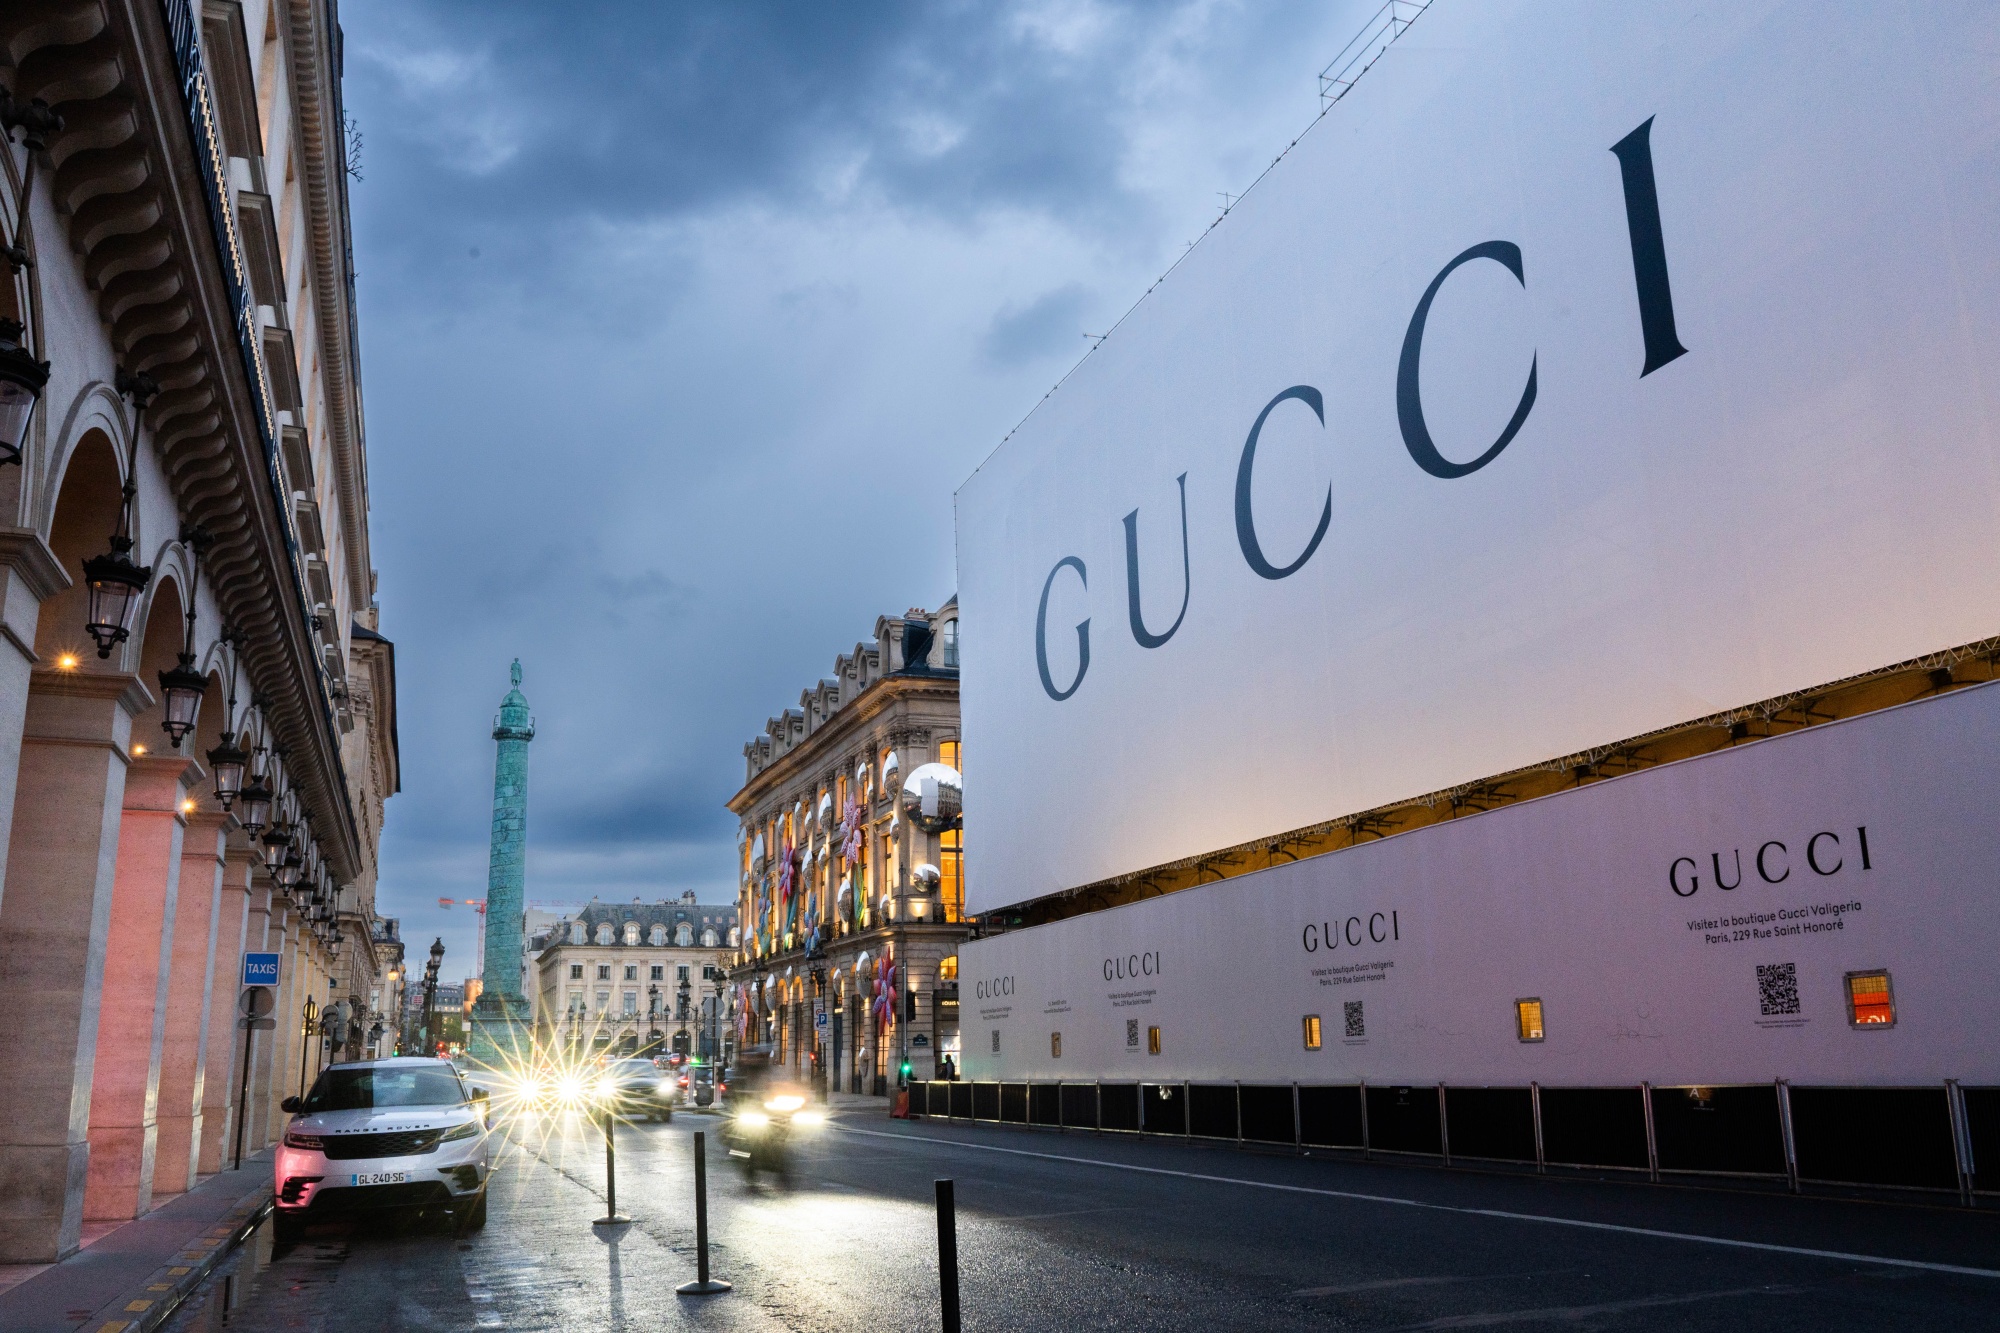 The Kering Group: A Closer Look At 12 Brands That Define Luxury